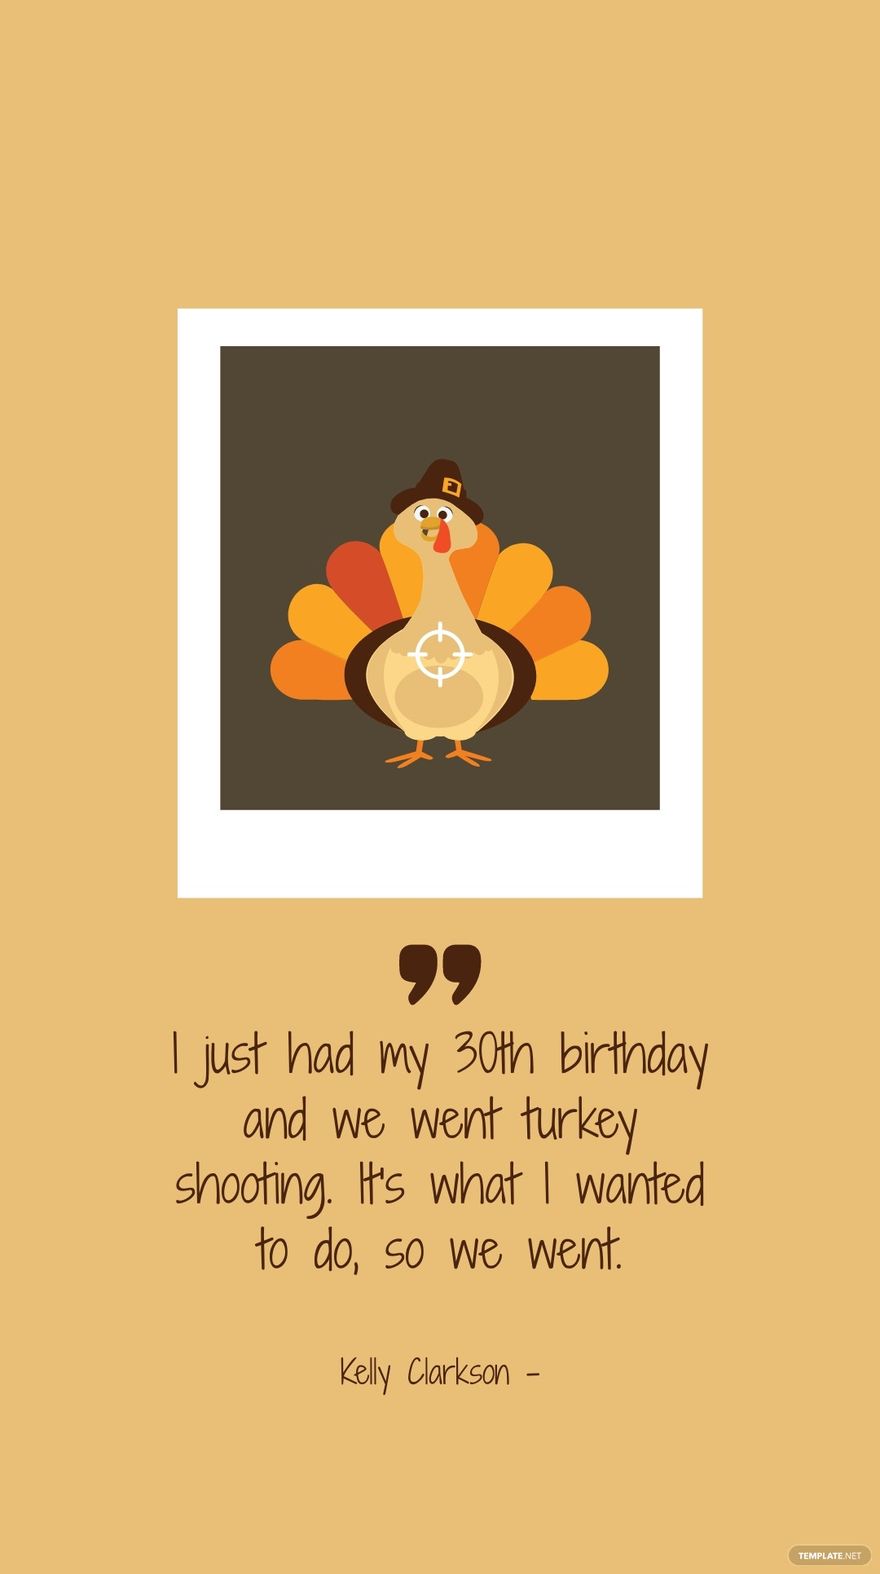 Kelly Clarkson - I just had my 30th birthday and we went turkey shooting. It's what I wanted to do, so we went.